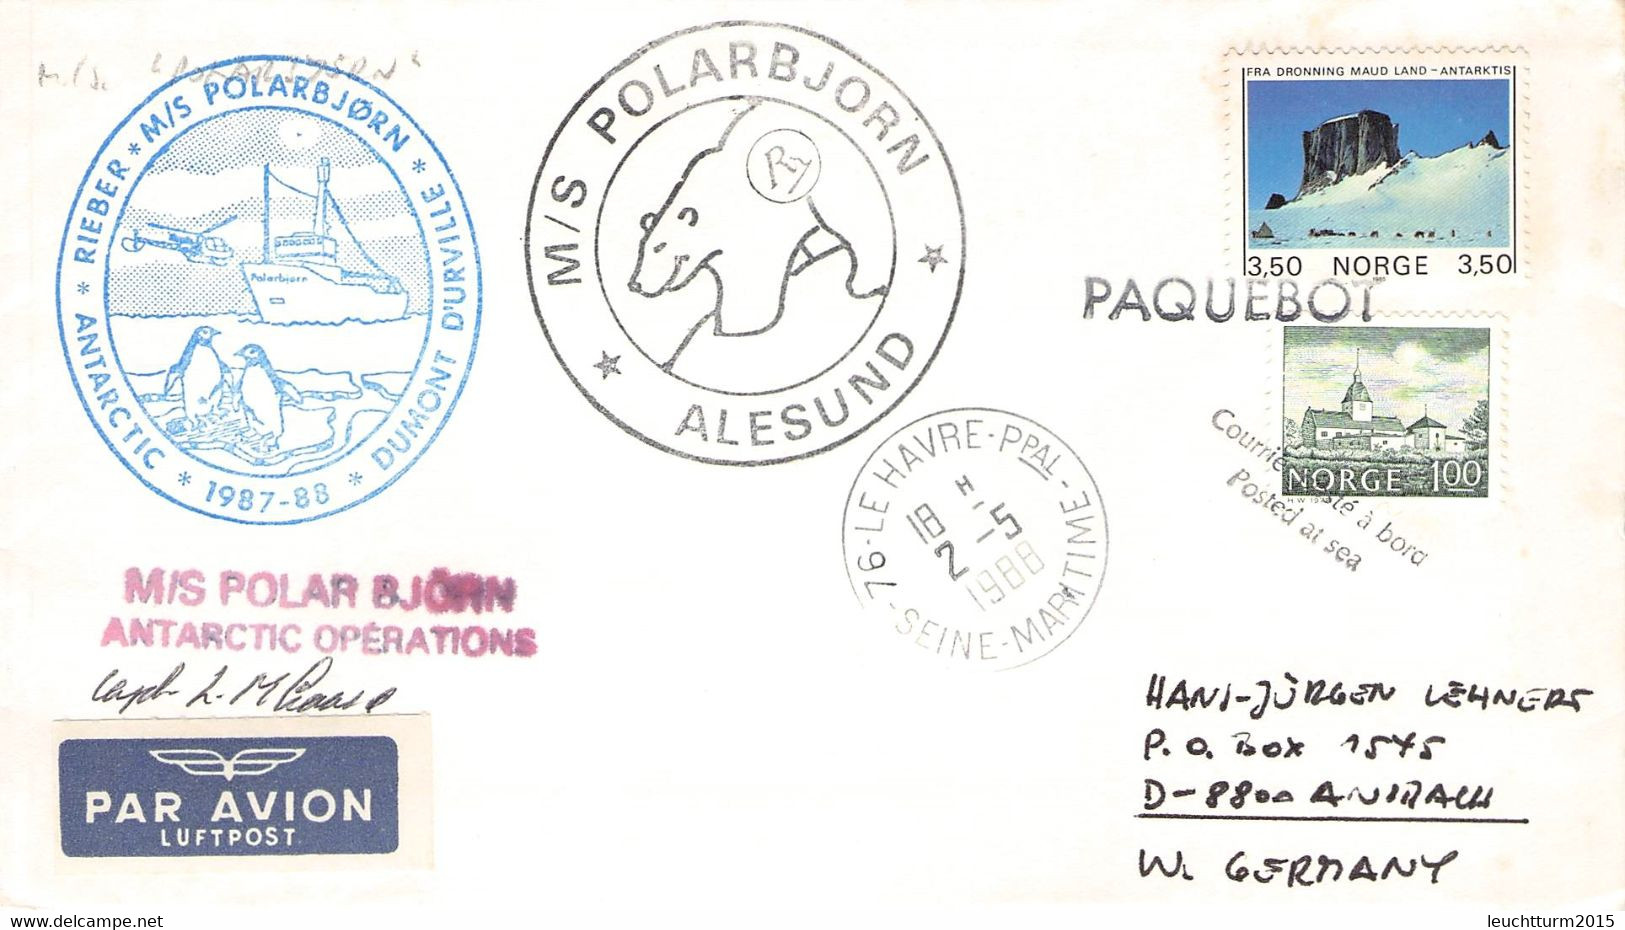 NORWAY - M/S POLARBJÖRN -PAQUEBOT- 1988 / ZL143 - Covers & Documents